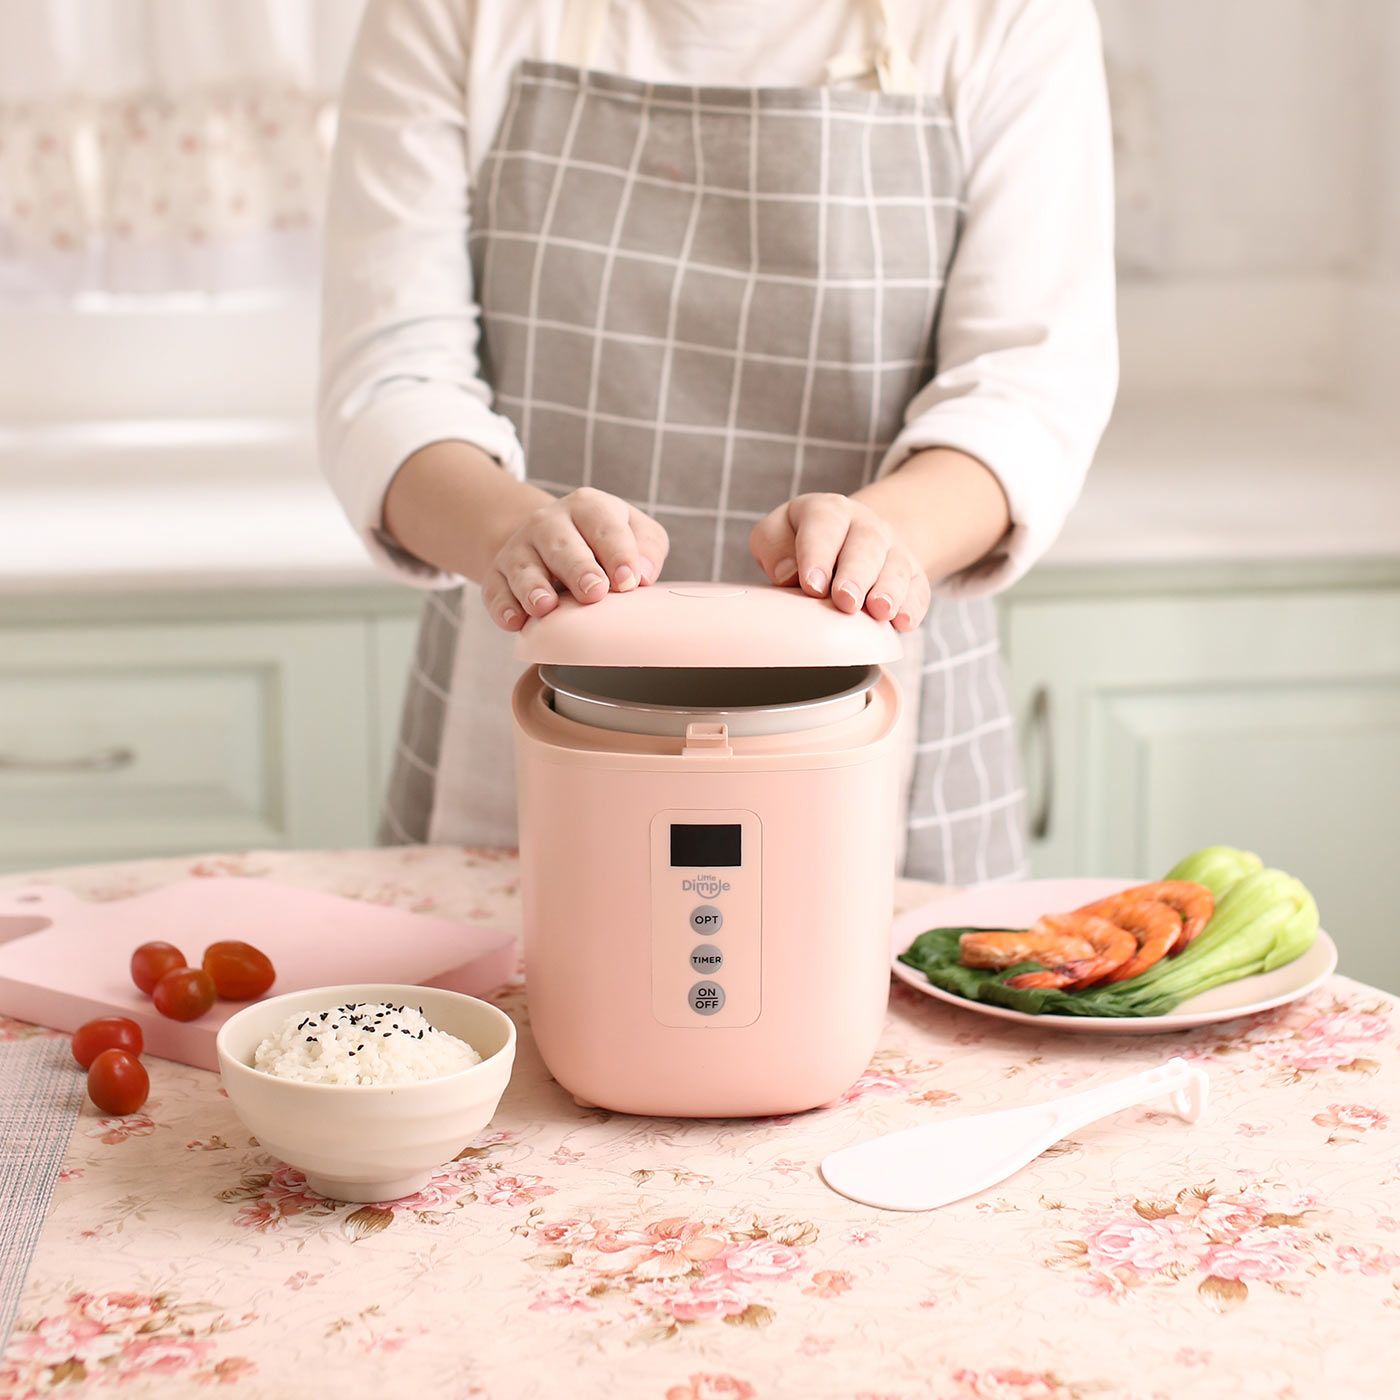 Little Dimple Mini Rice Cooker Pink - 3